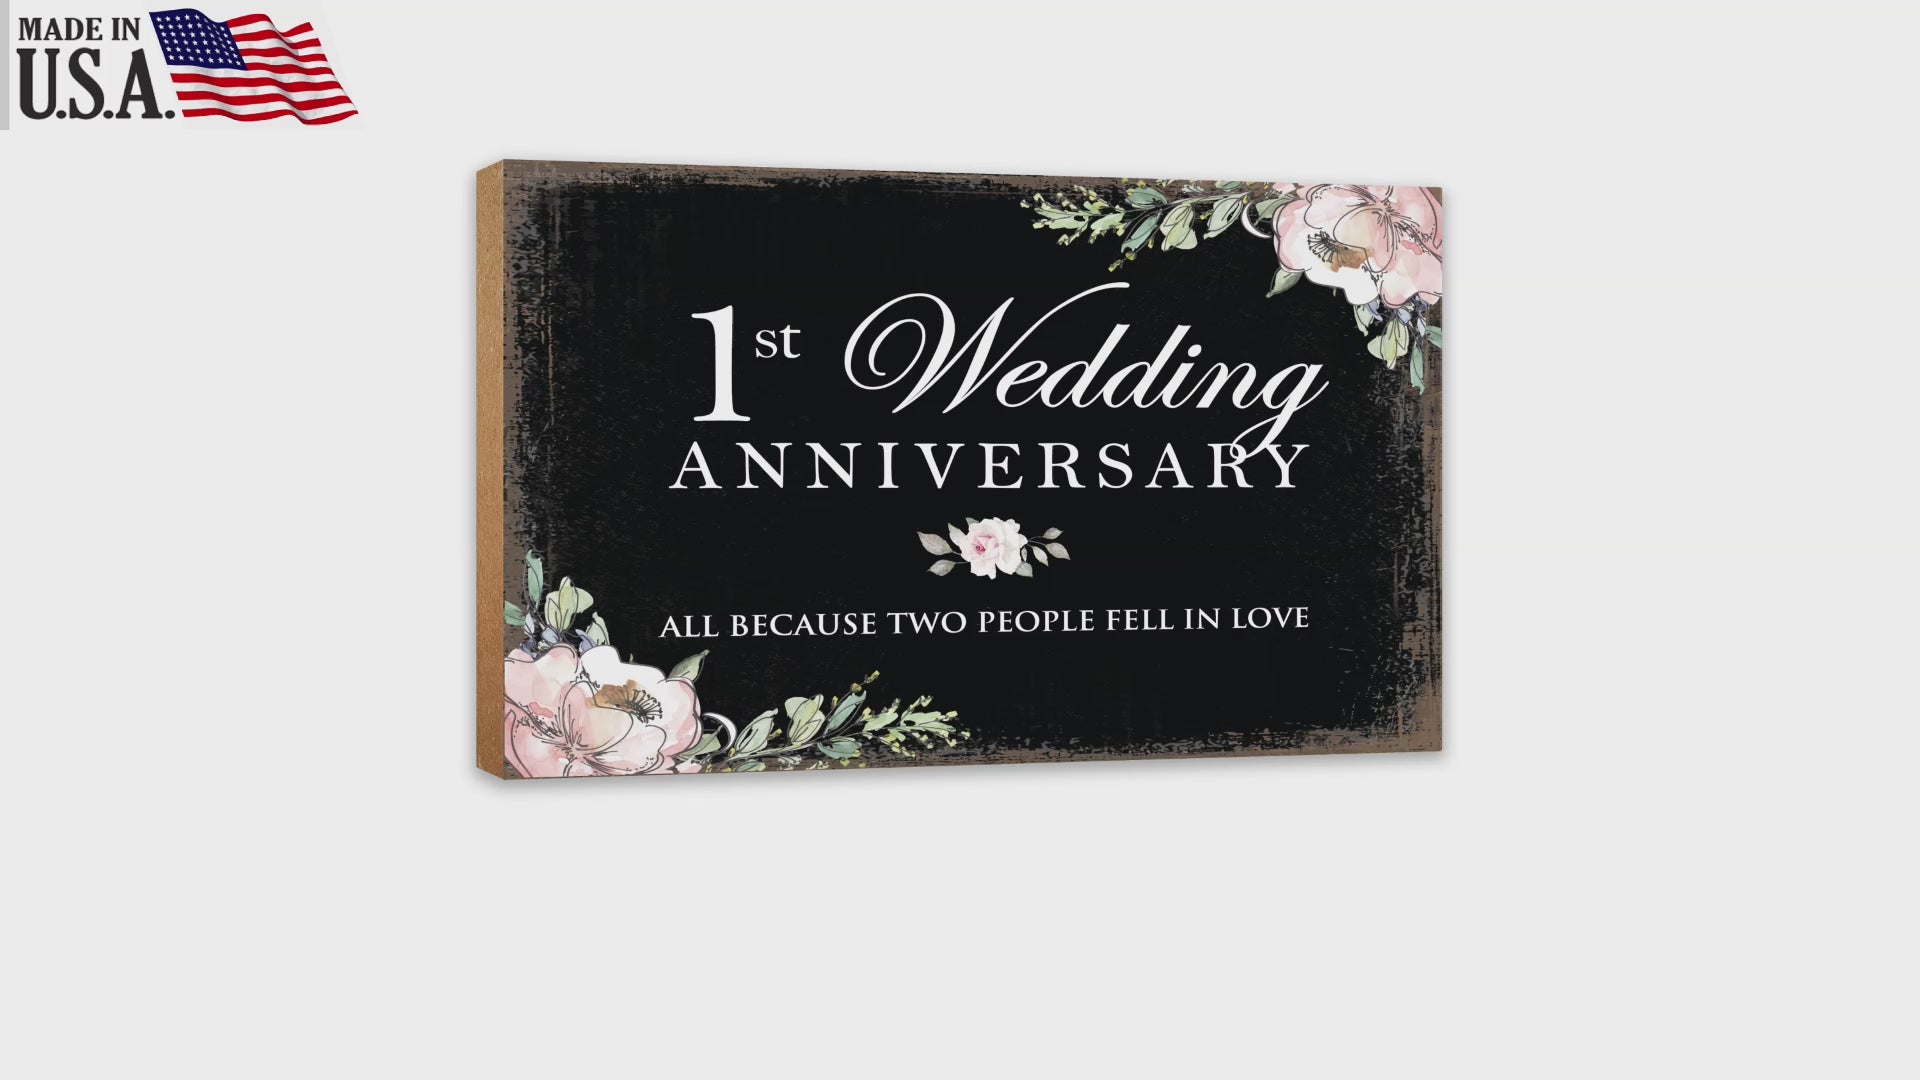 Lifesong Milestones Wedding Anniversary Unique Shelf Decor and Tabletop Signs Gifts for Couples